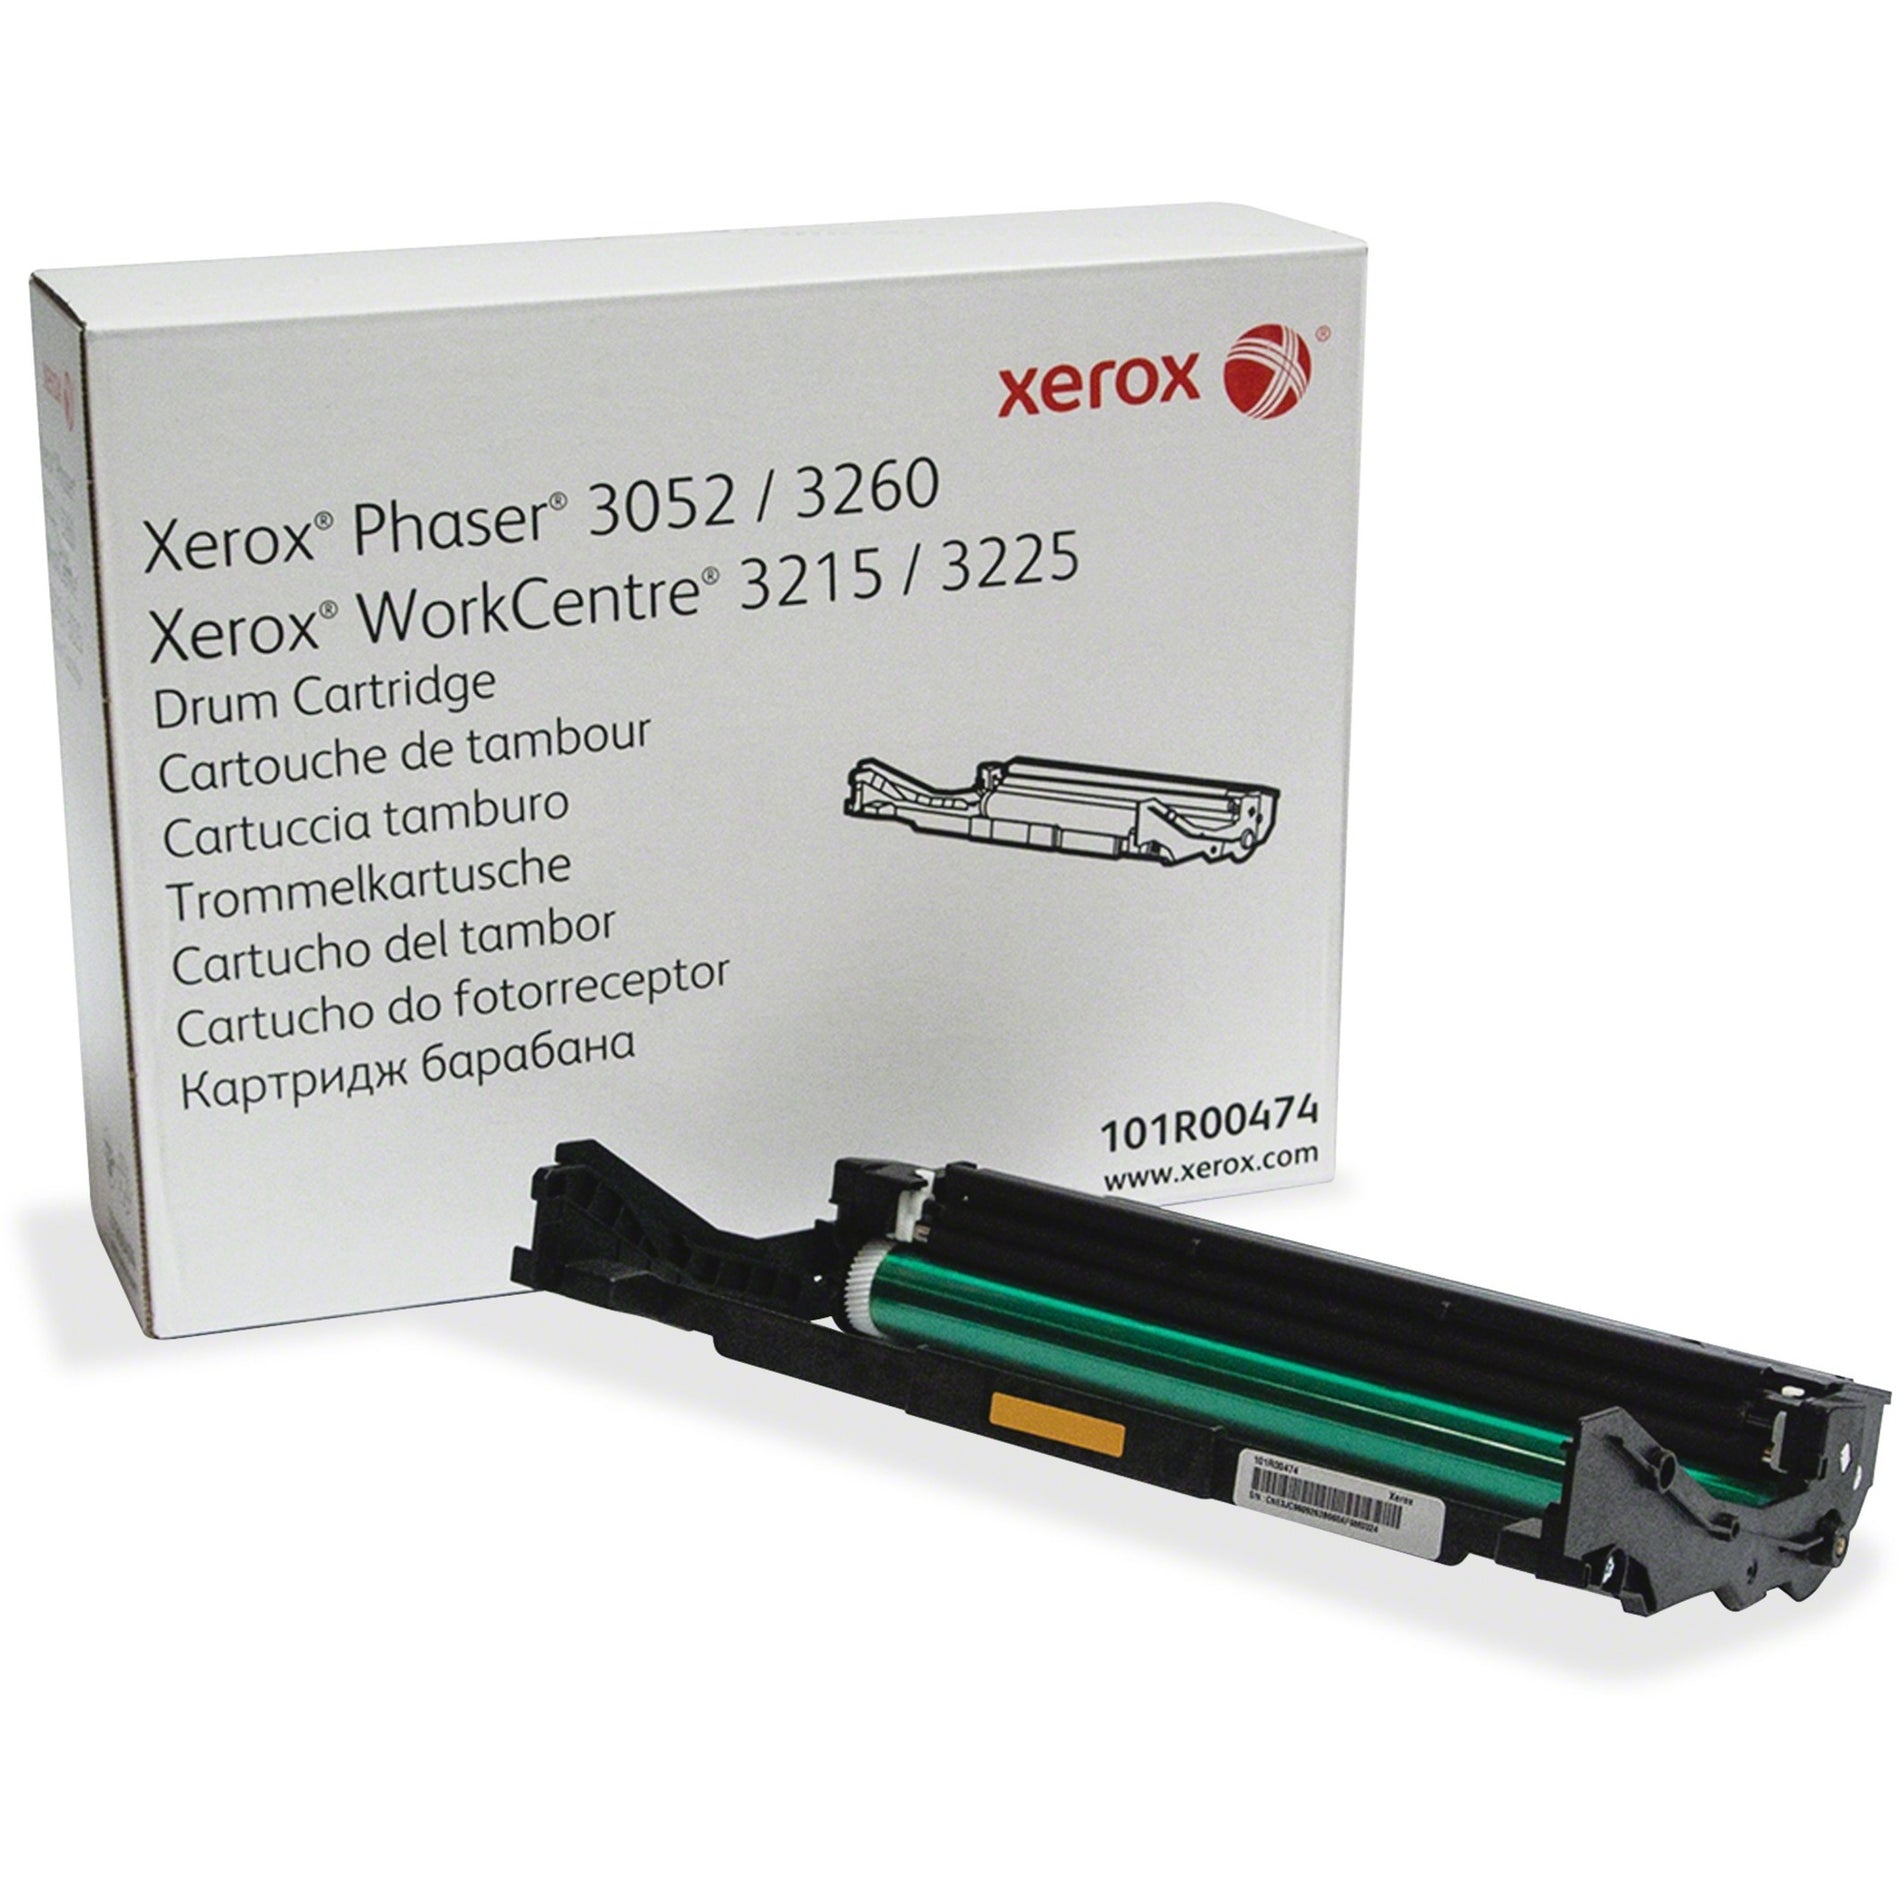 Xerox 101R00474 Phaser 3250/WorkCentre 3225 Drum Cartridge, Black, 10,000 Page Yield